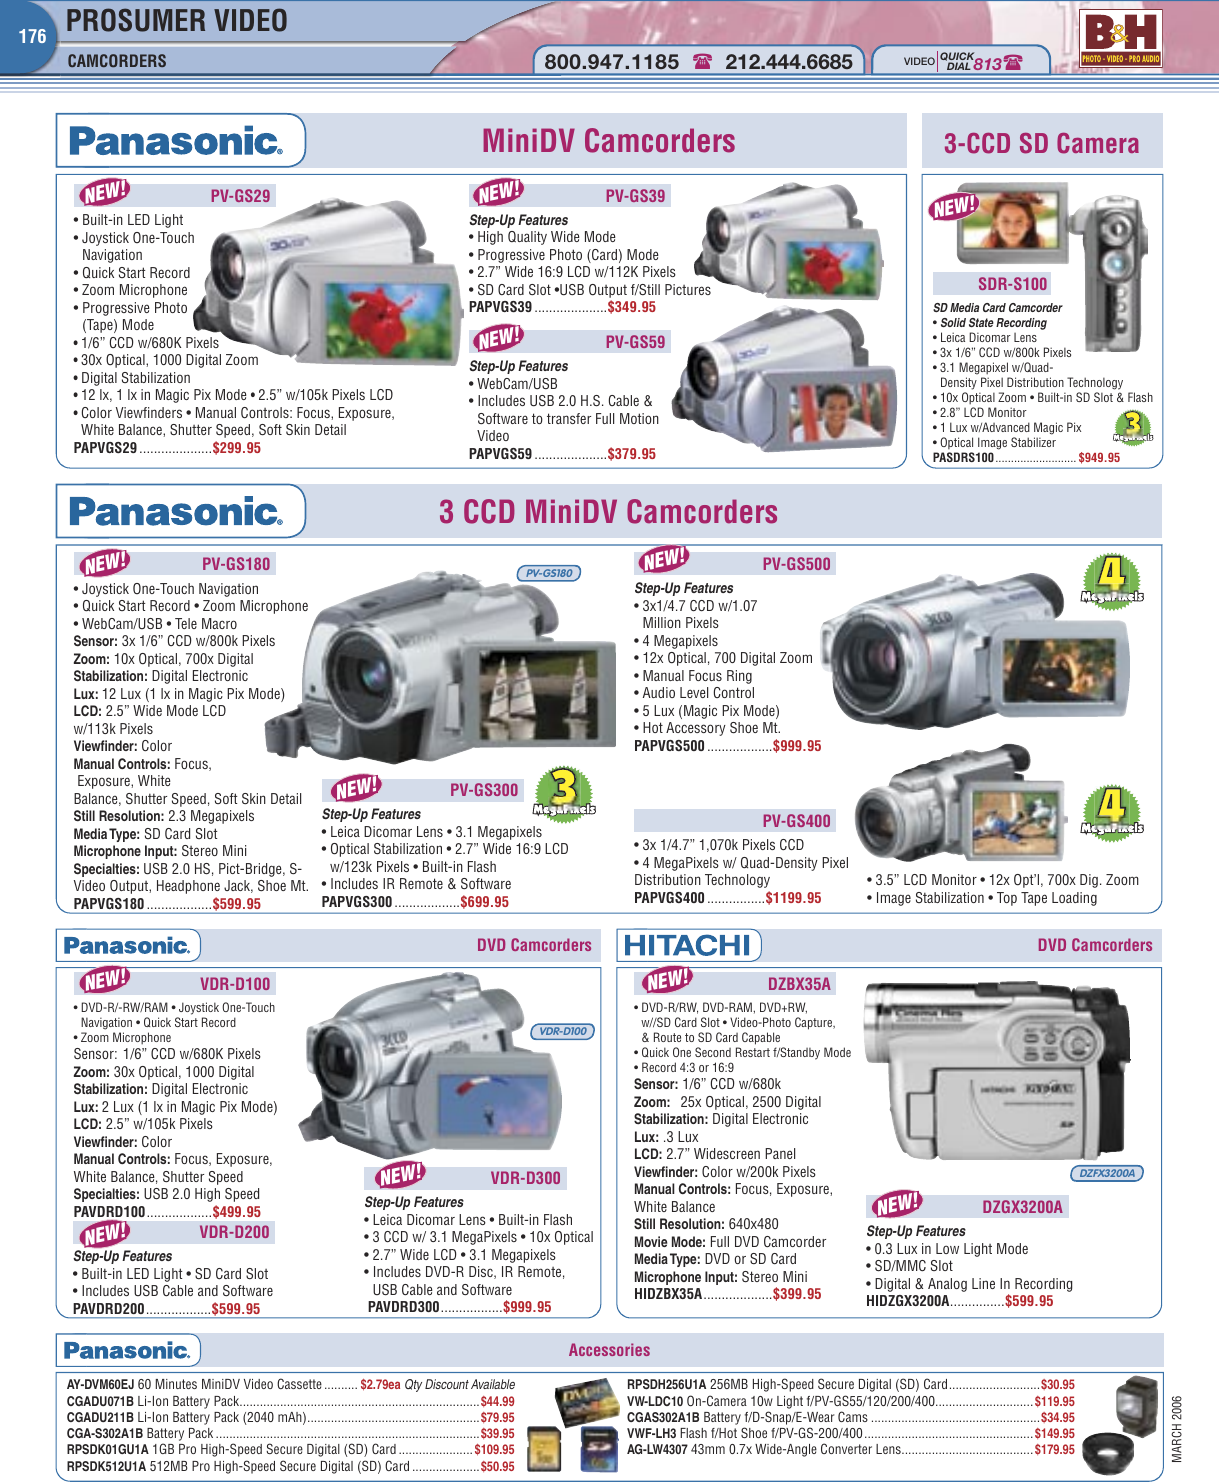 Page 5 of 12 - Canon Canon-Elura-100-Users-Manual- 172-183 ProsumerVideo 03-06  Canon-elura-100-users-manual